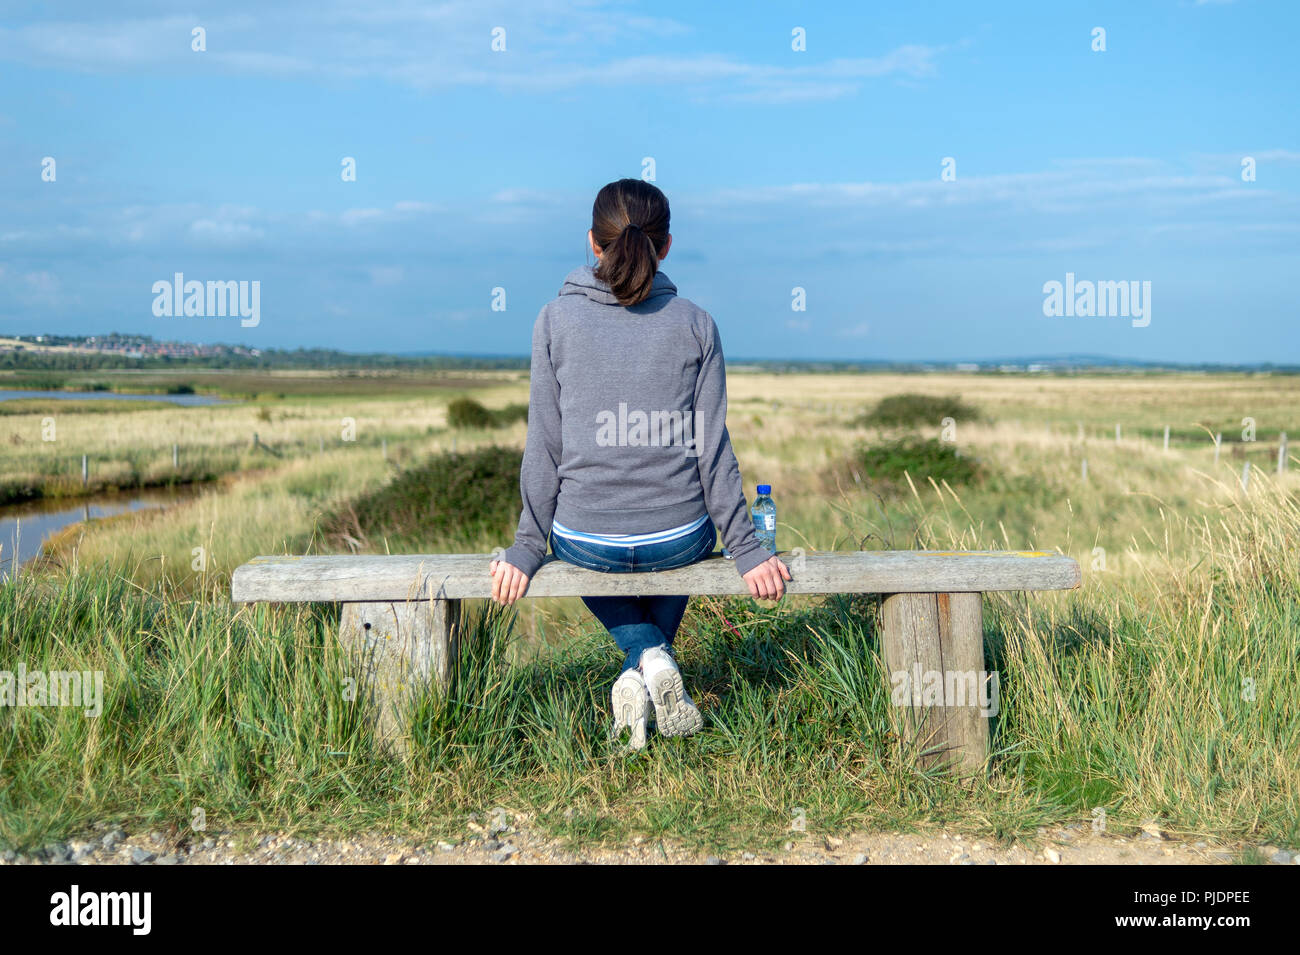 back view of a woman sitting on a wooden bench looking at the countryside. Stock Photo